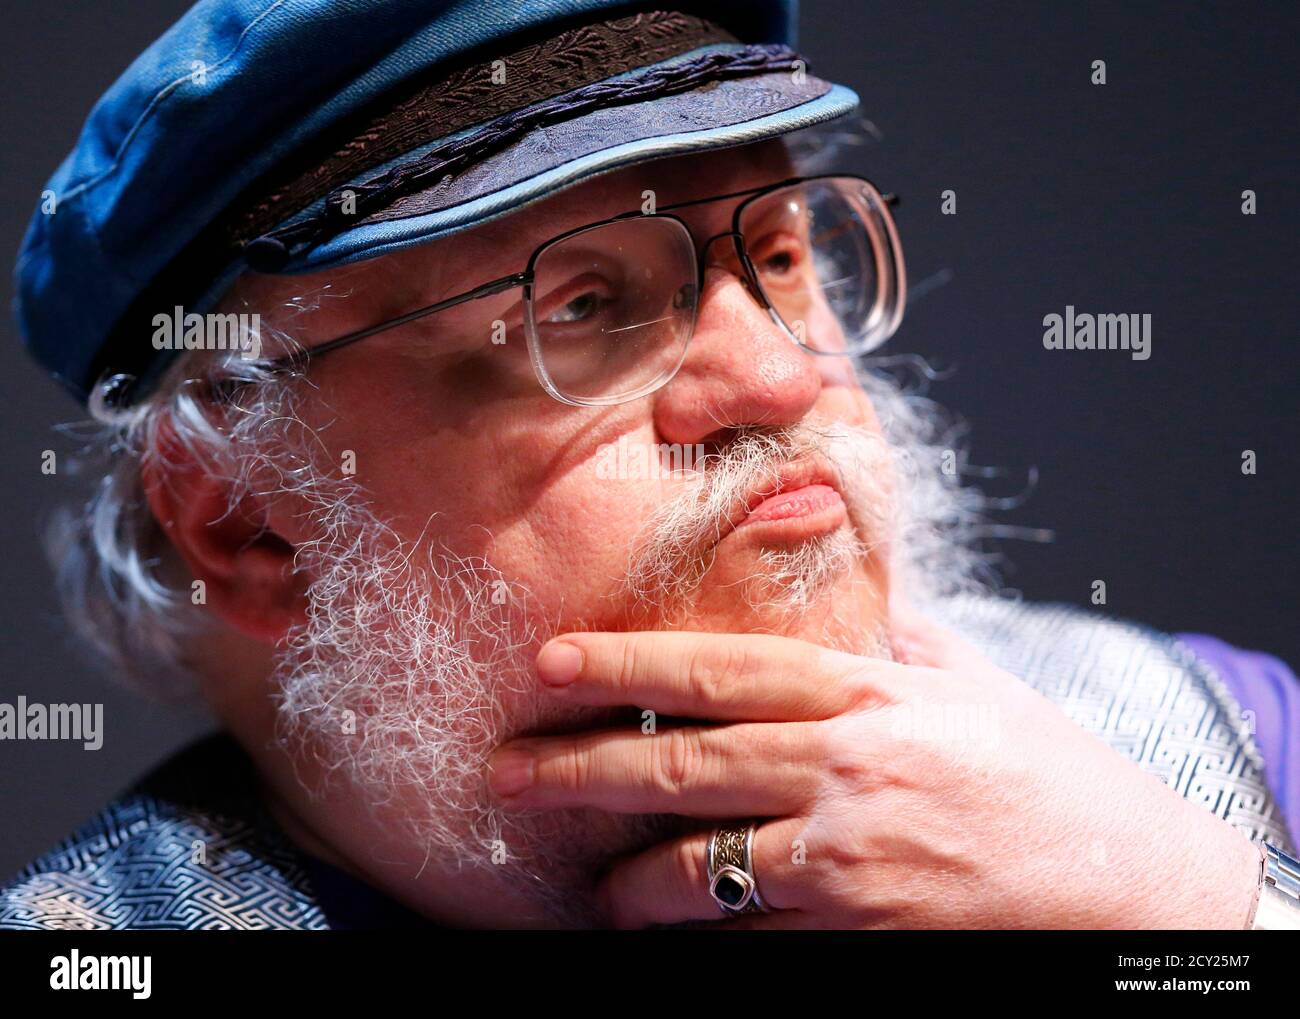 George R.R. Martin, author of the "Song of Ice and Fire" fantasy series  that is the basis of the television series "Game of Thrones", gestures  during his masterclass at the Neuchatel International